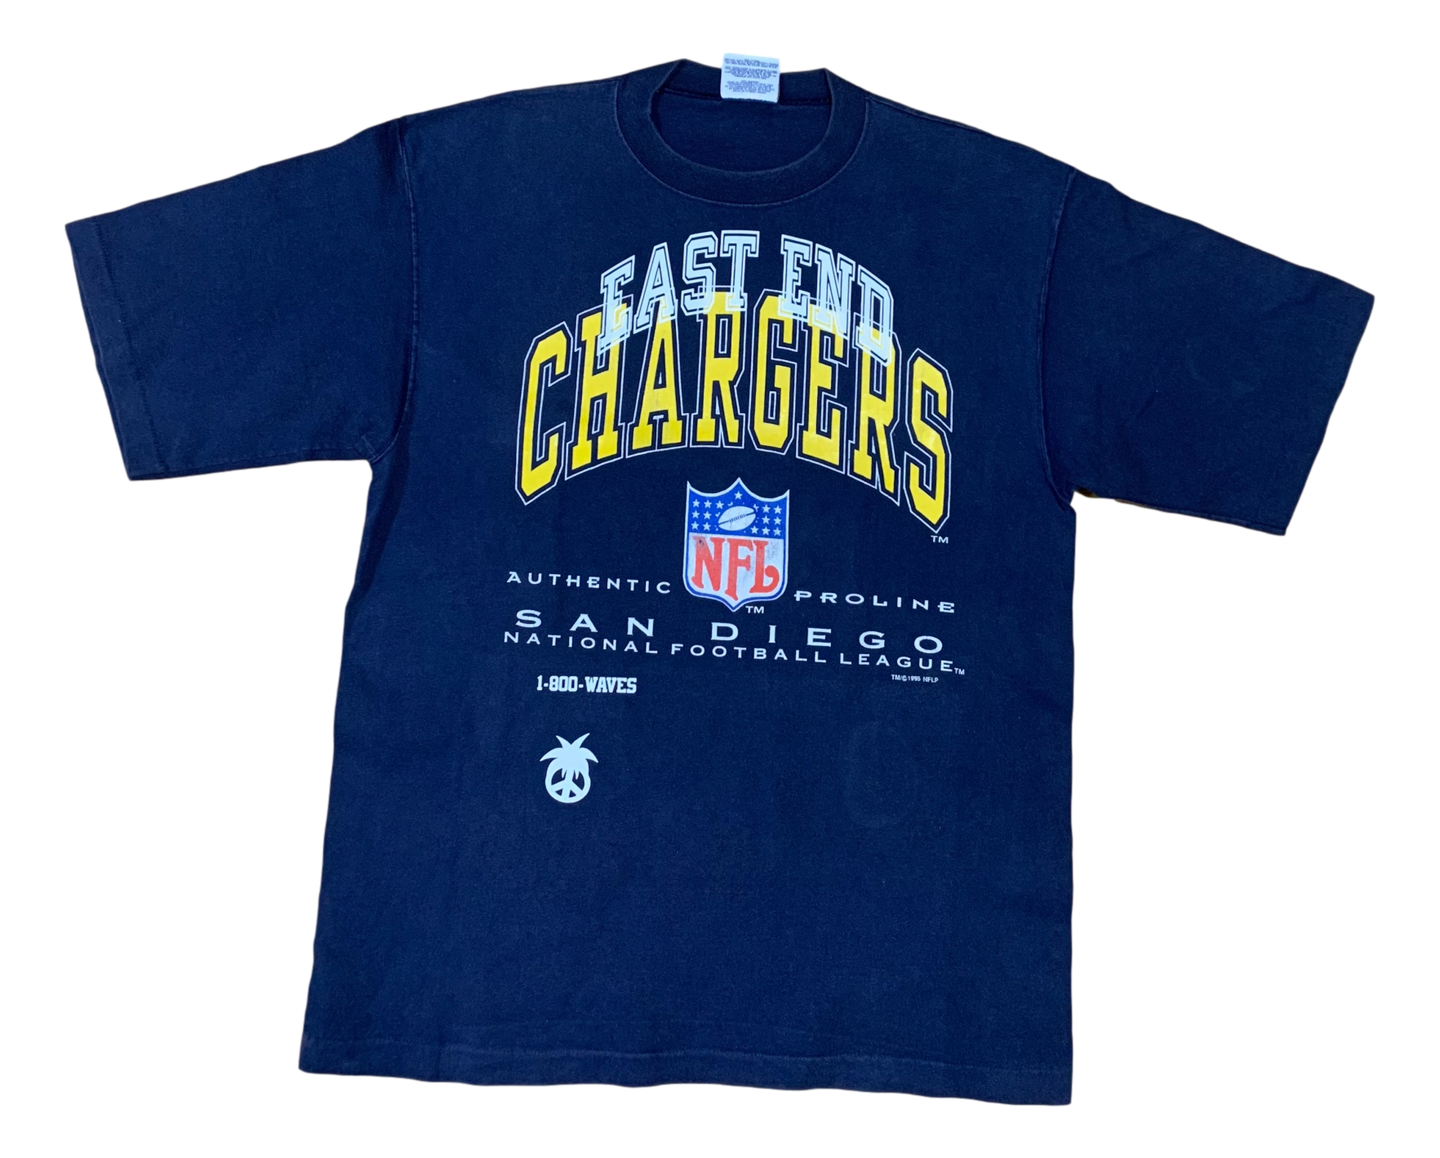 1/1 San Diego Chargers Tee - Large